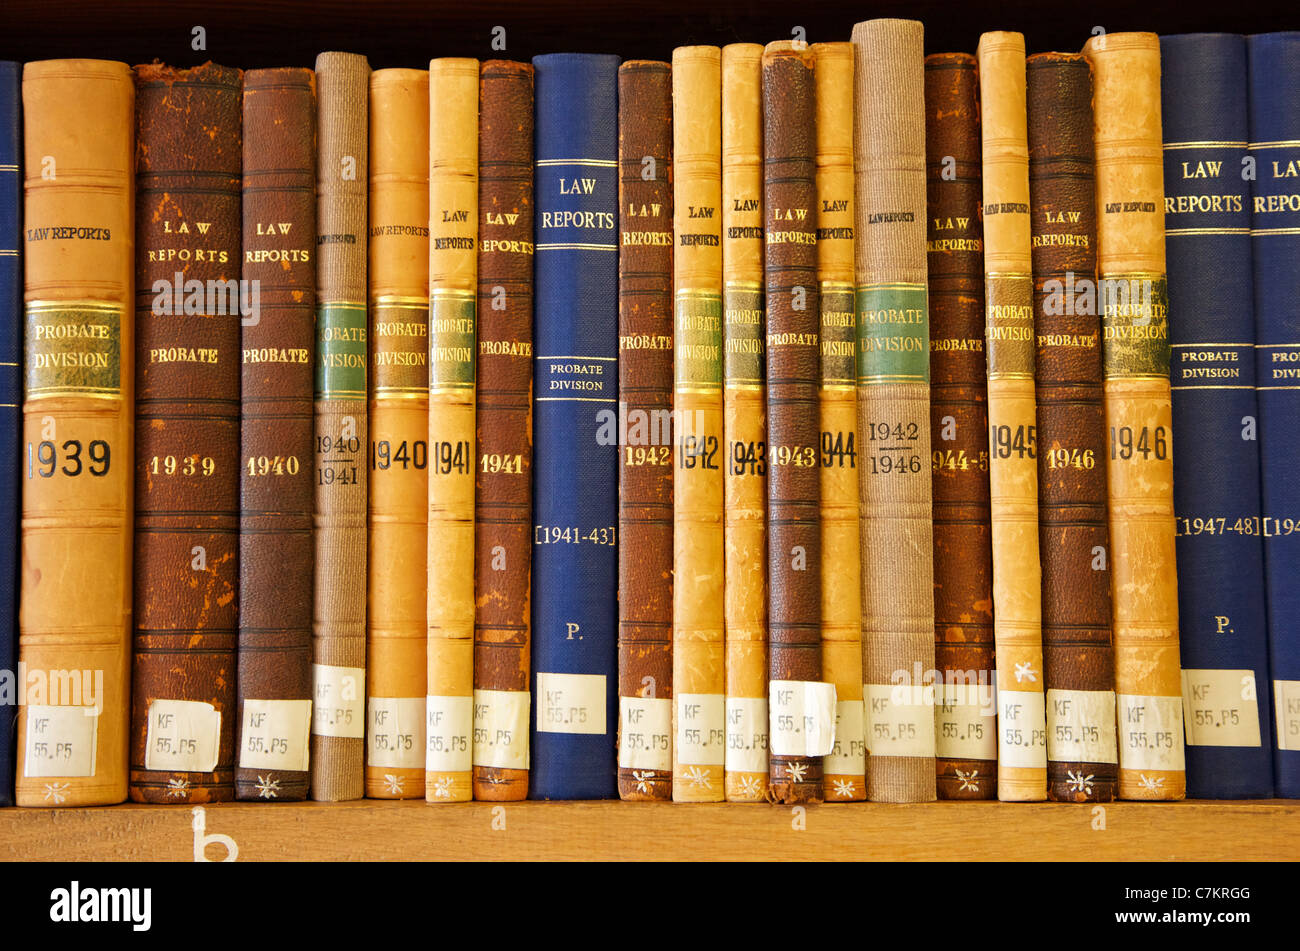 Bound volumes of law reports from 1939 to 1947 on a library shelf Stock Photo